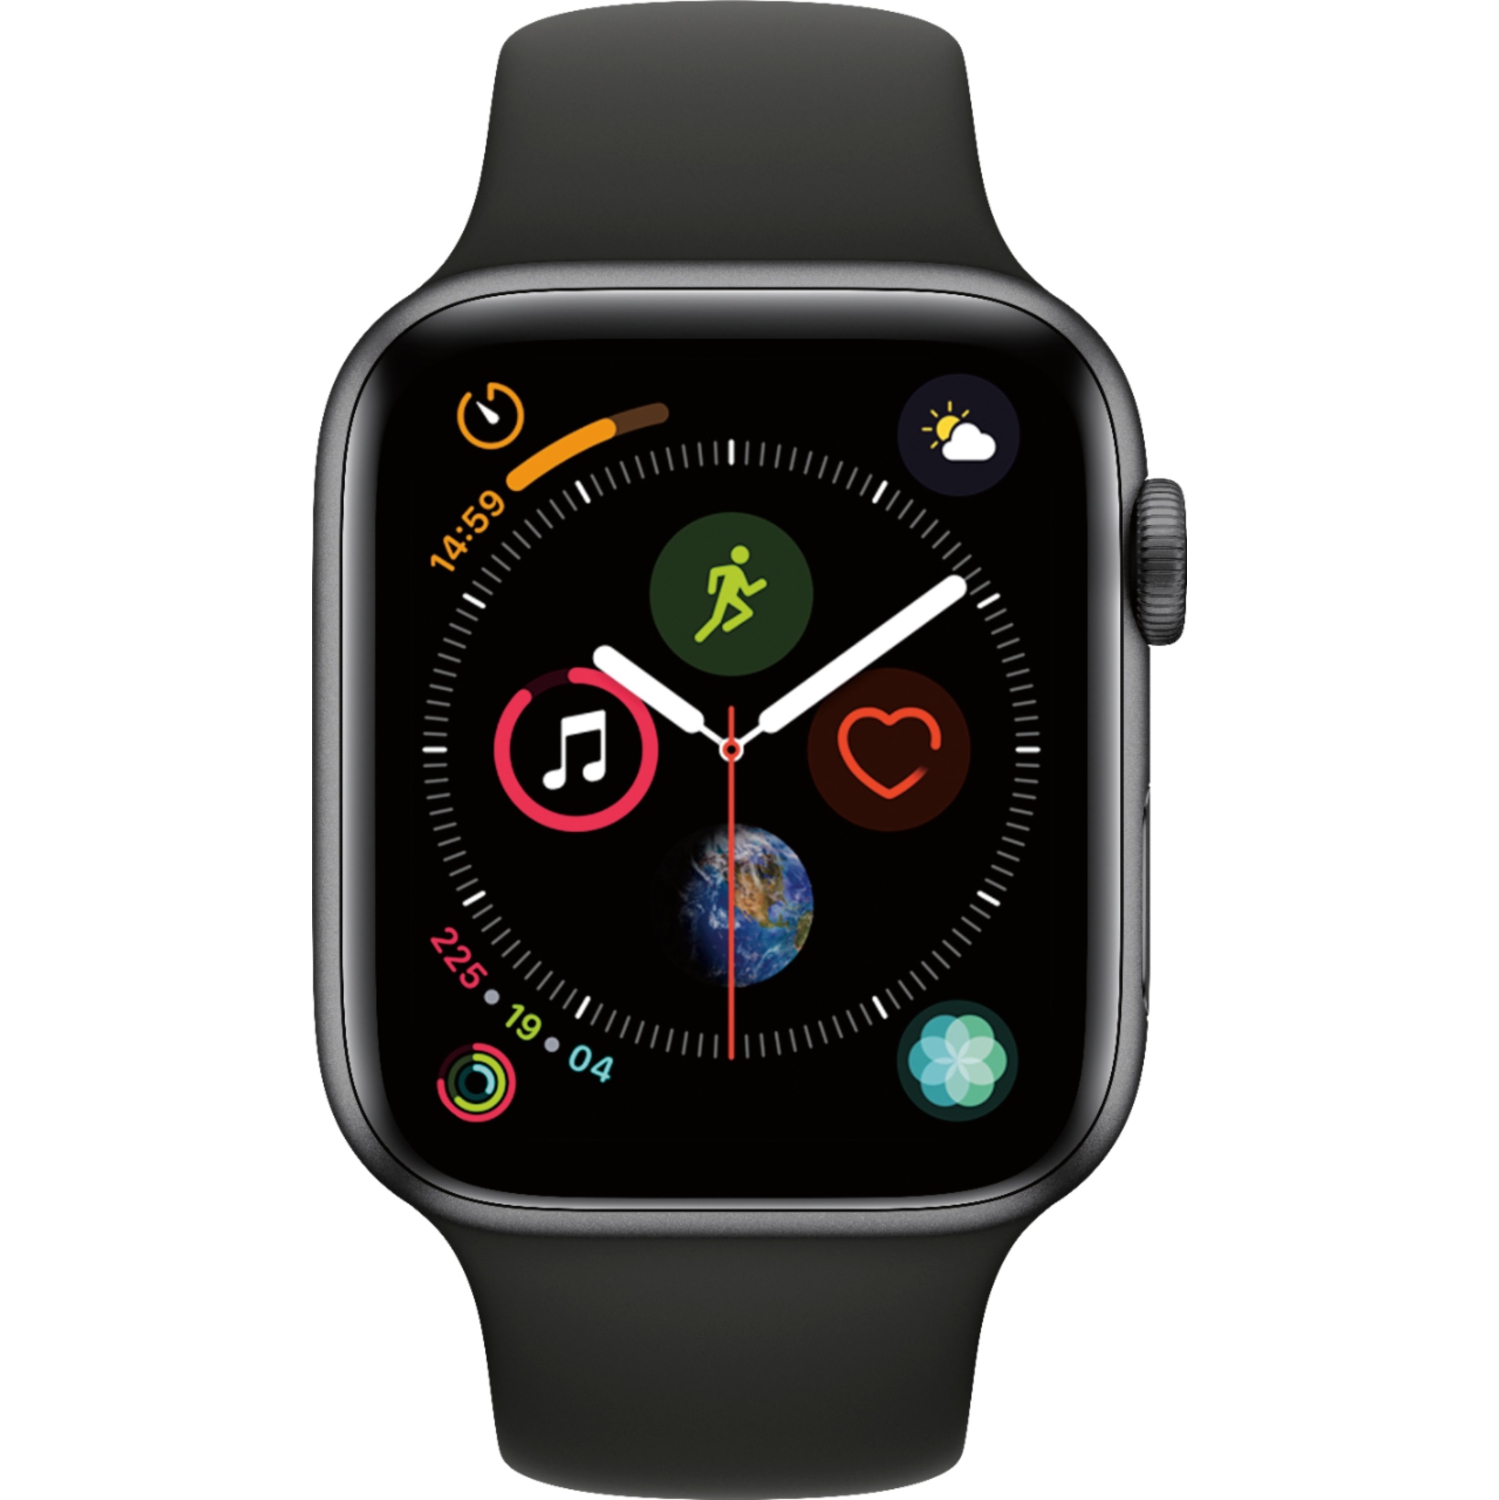 Refurbished (Excellent) - Apple Watch Series 4 (GPS) 44mm Space Gray Aluminum with Black Sport Band - Certified Refurbished